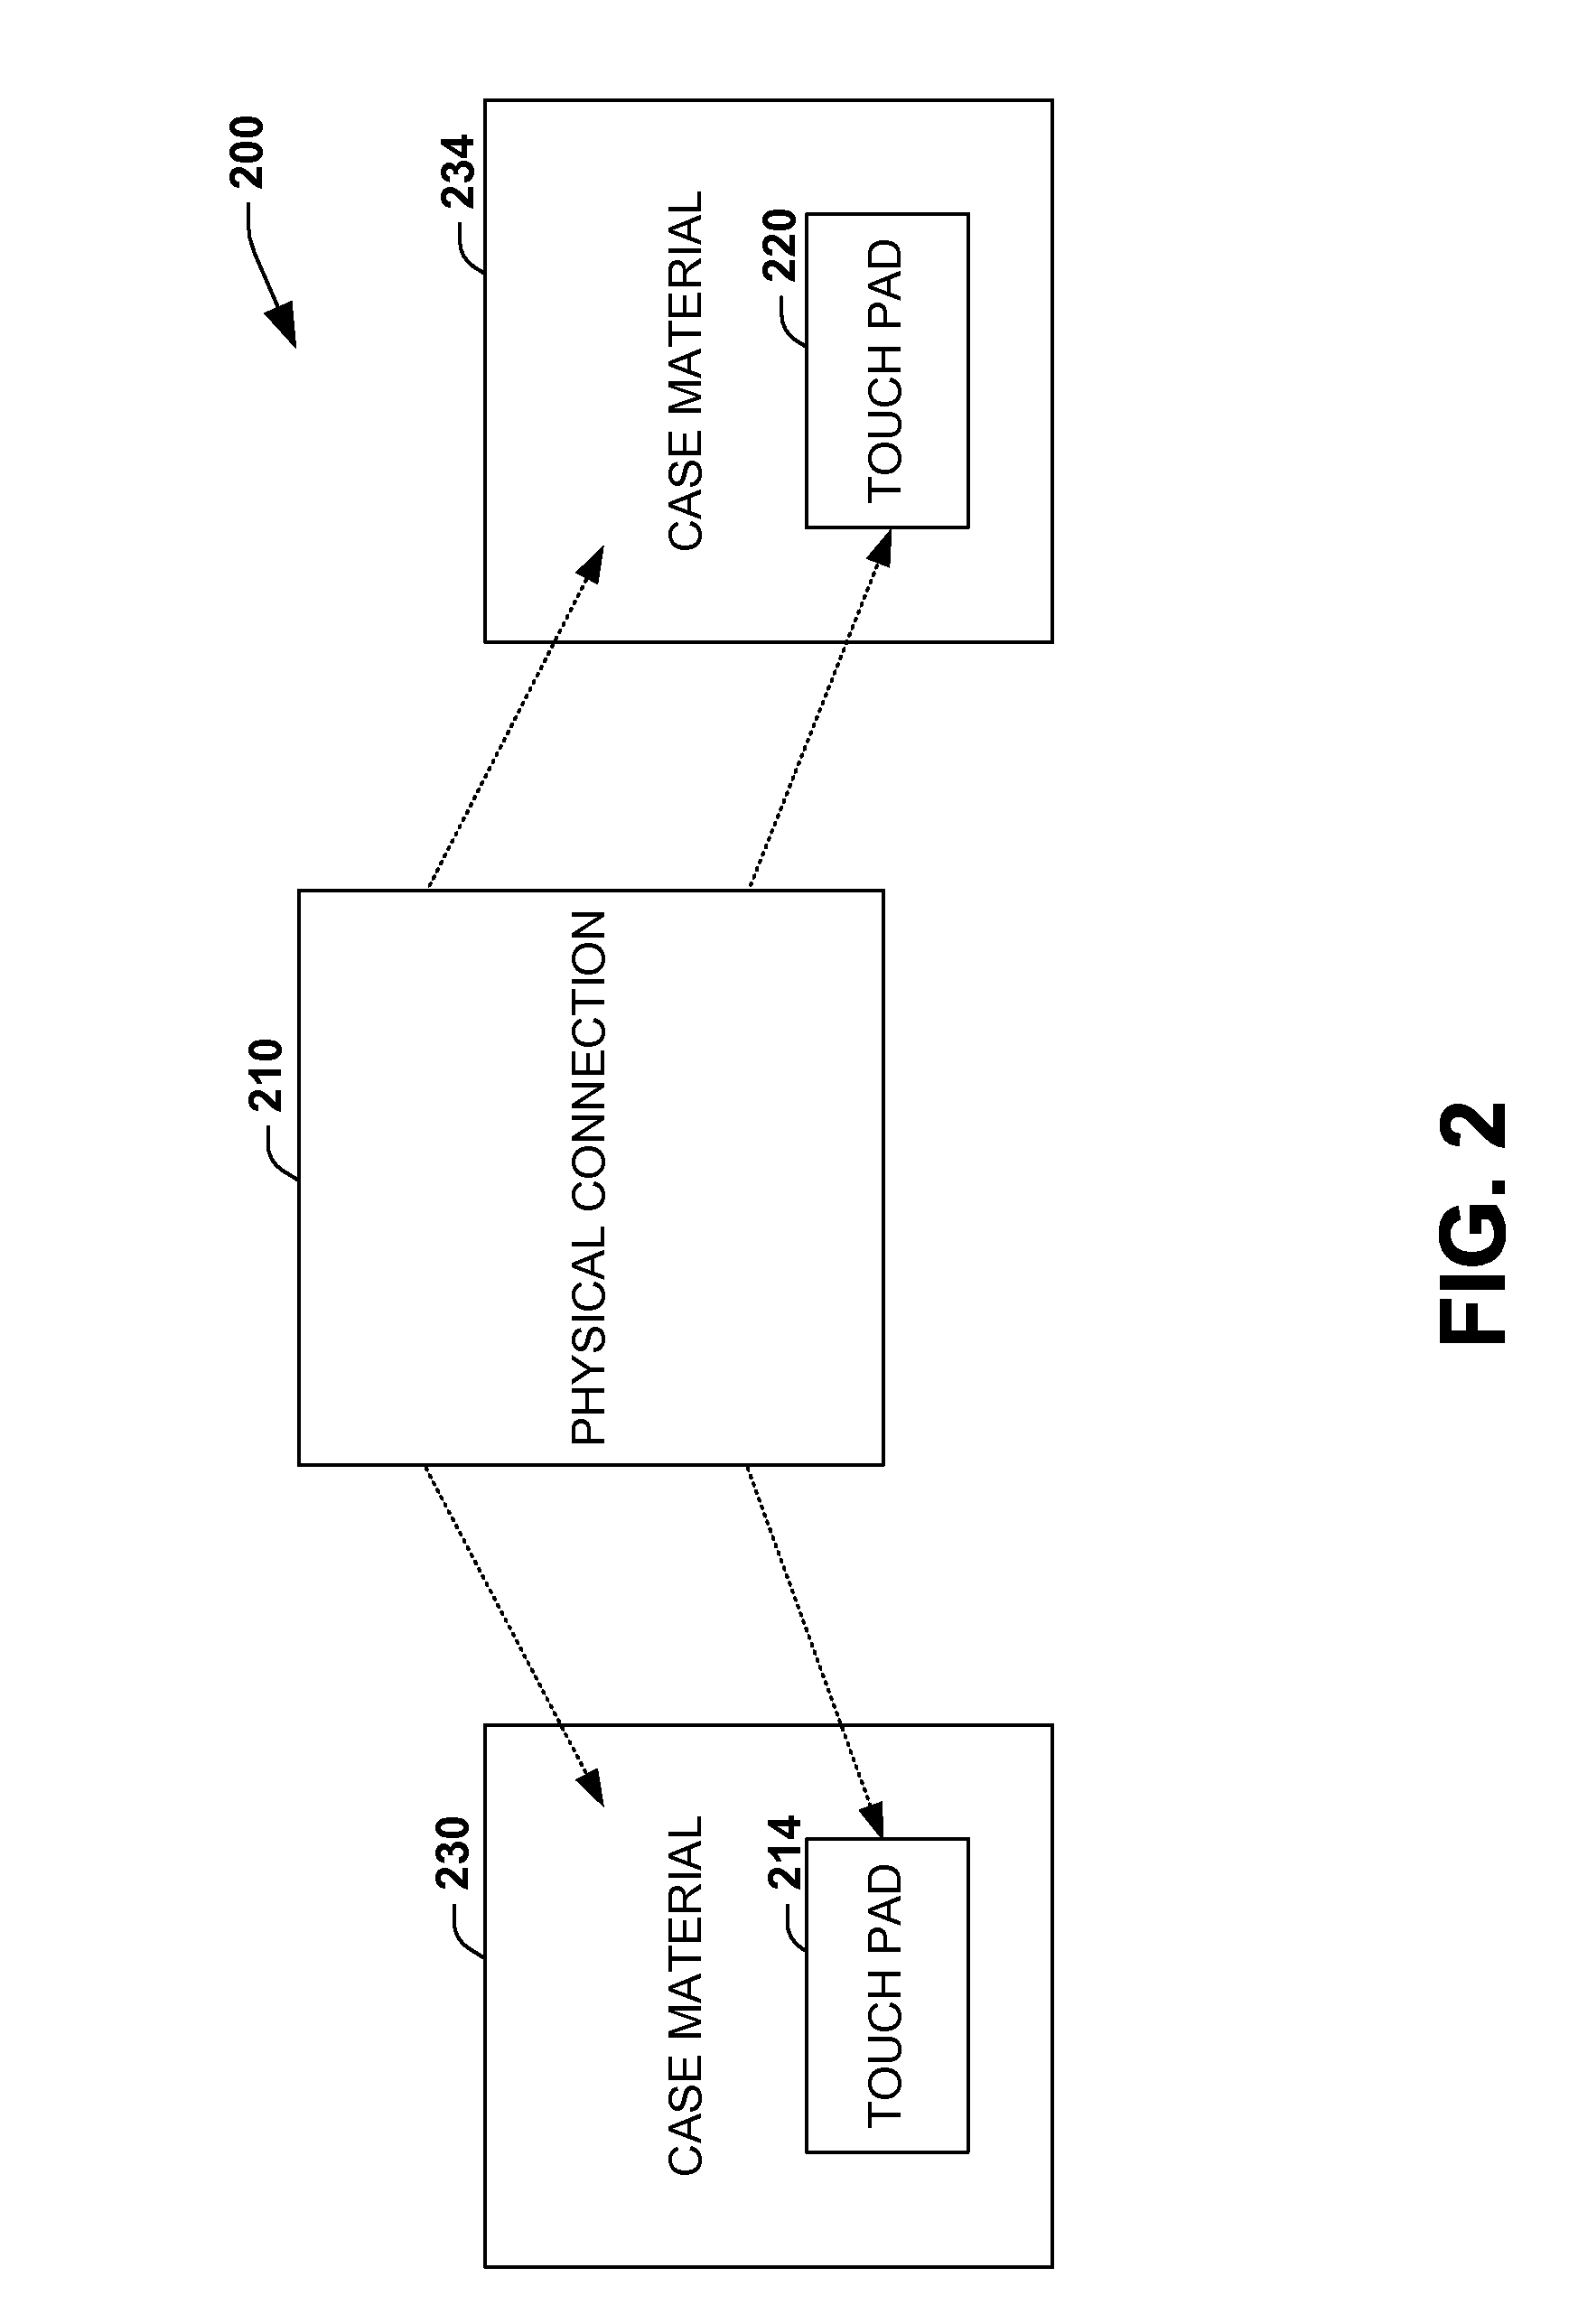 Capacitive bonding of devices